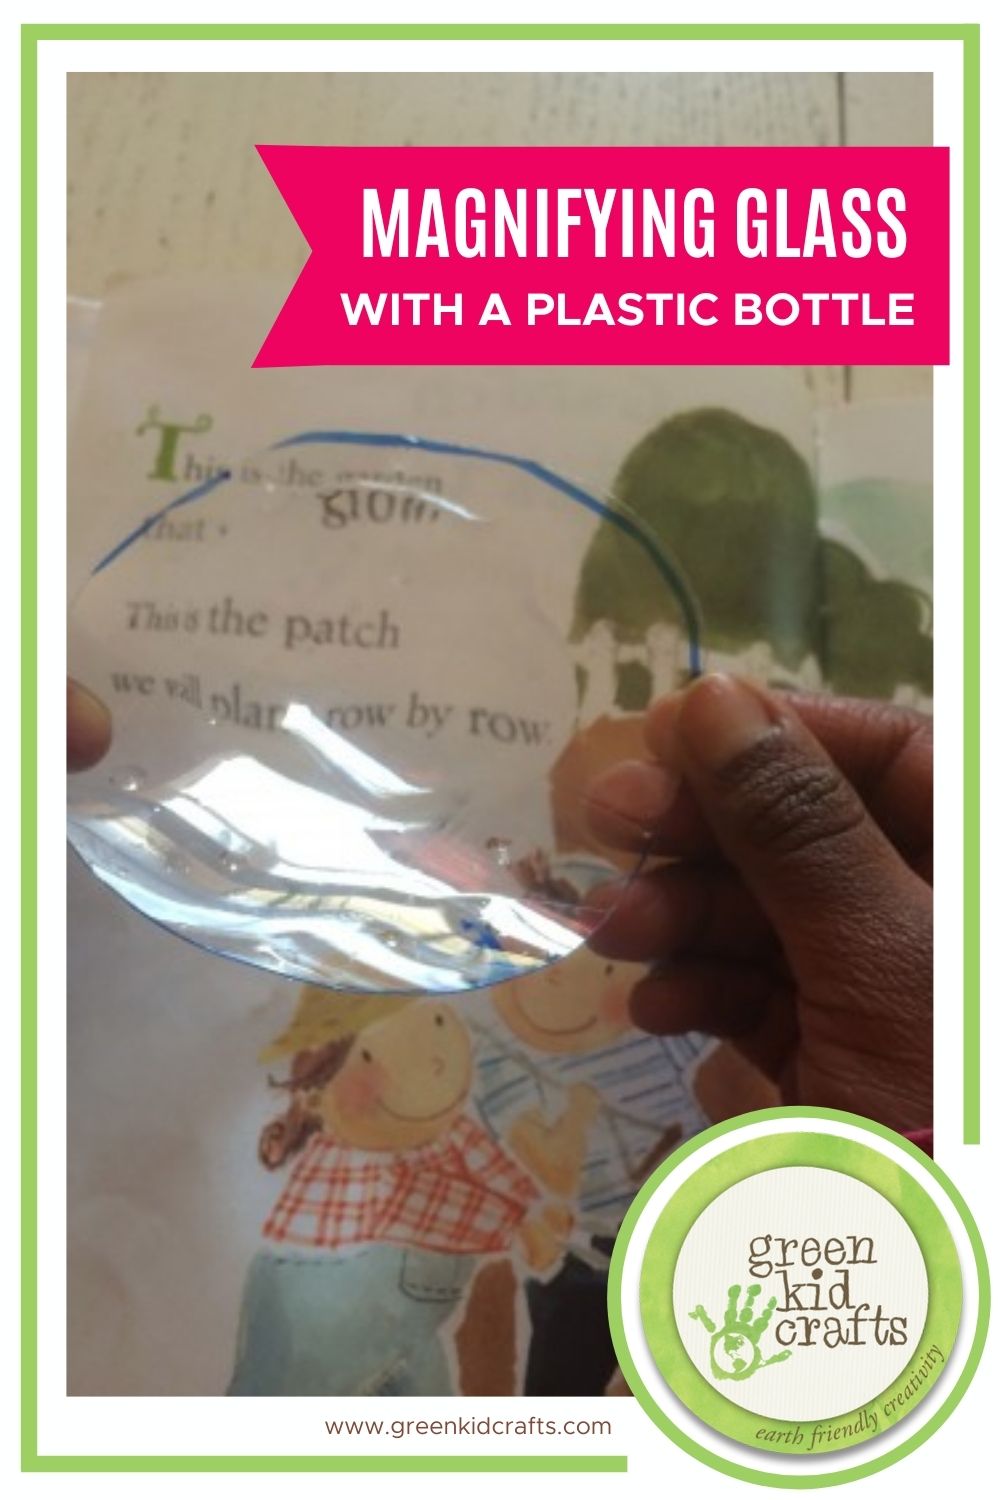 5 Plastic Magnifying Glasses SPECIAL BUY Bug Viewer Pack of 5 